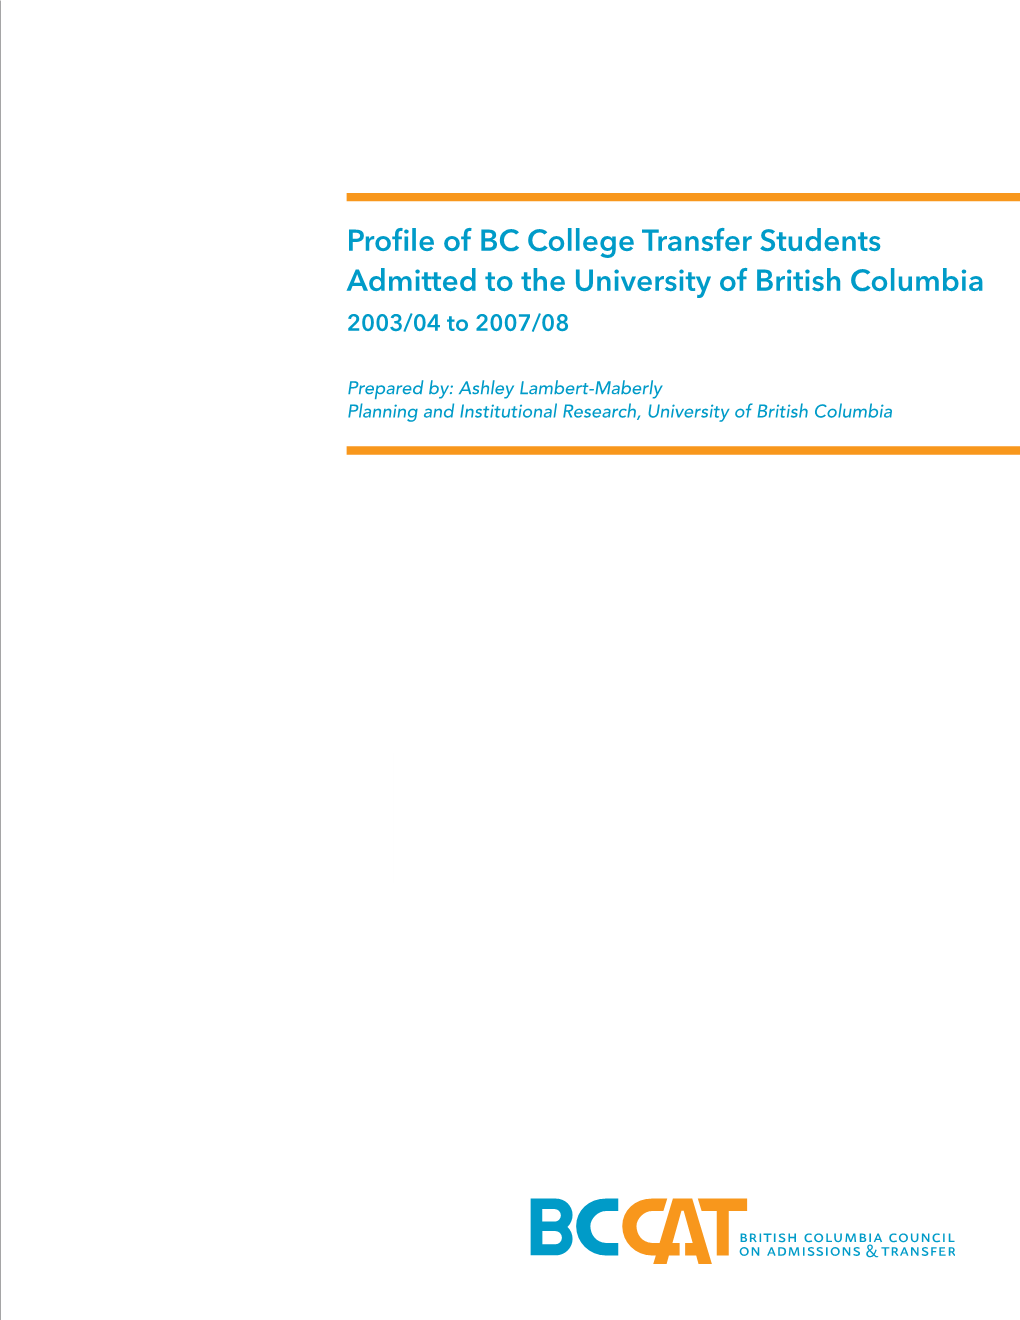 A Profile of BC College Transfer Students Admitted to the University